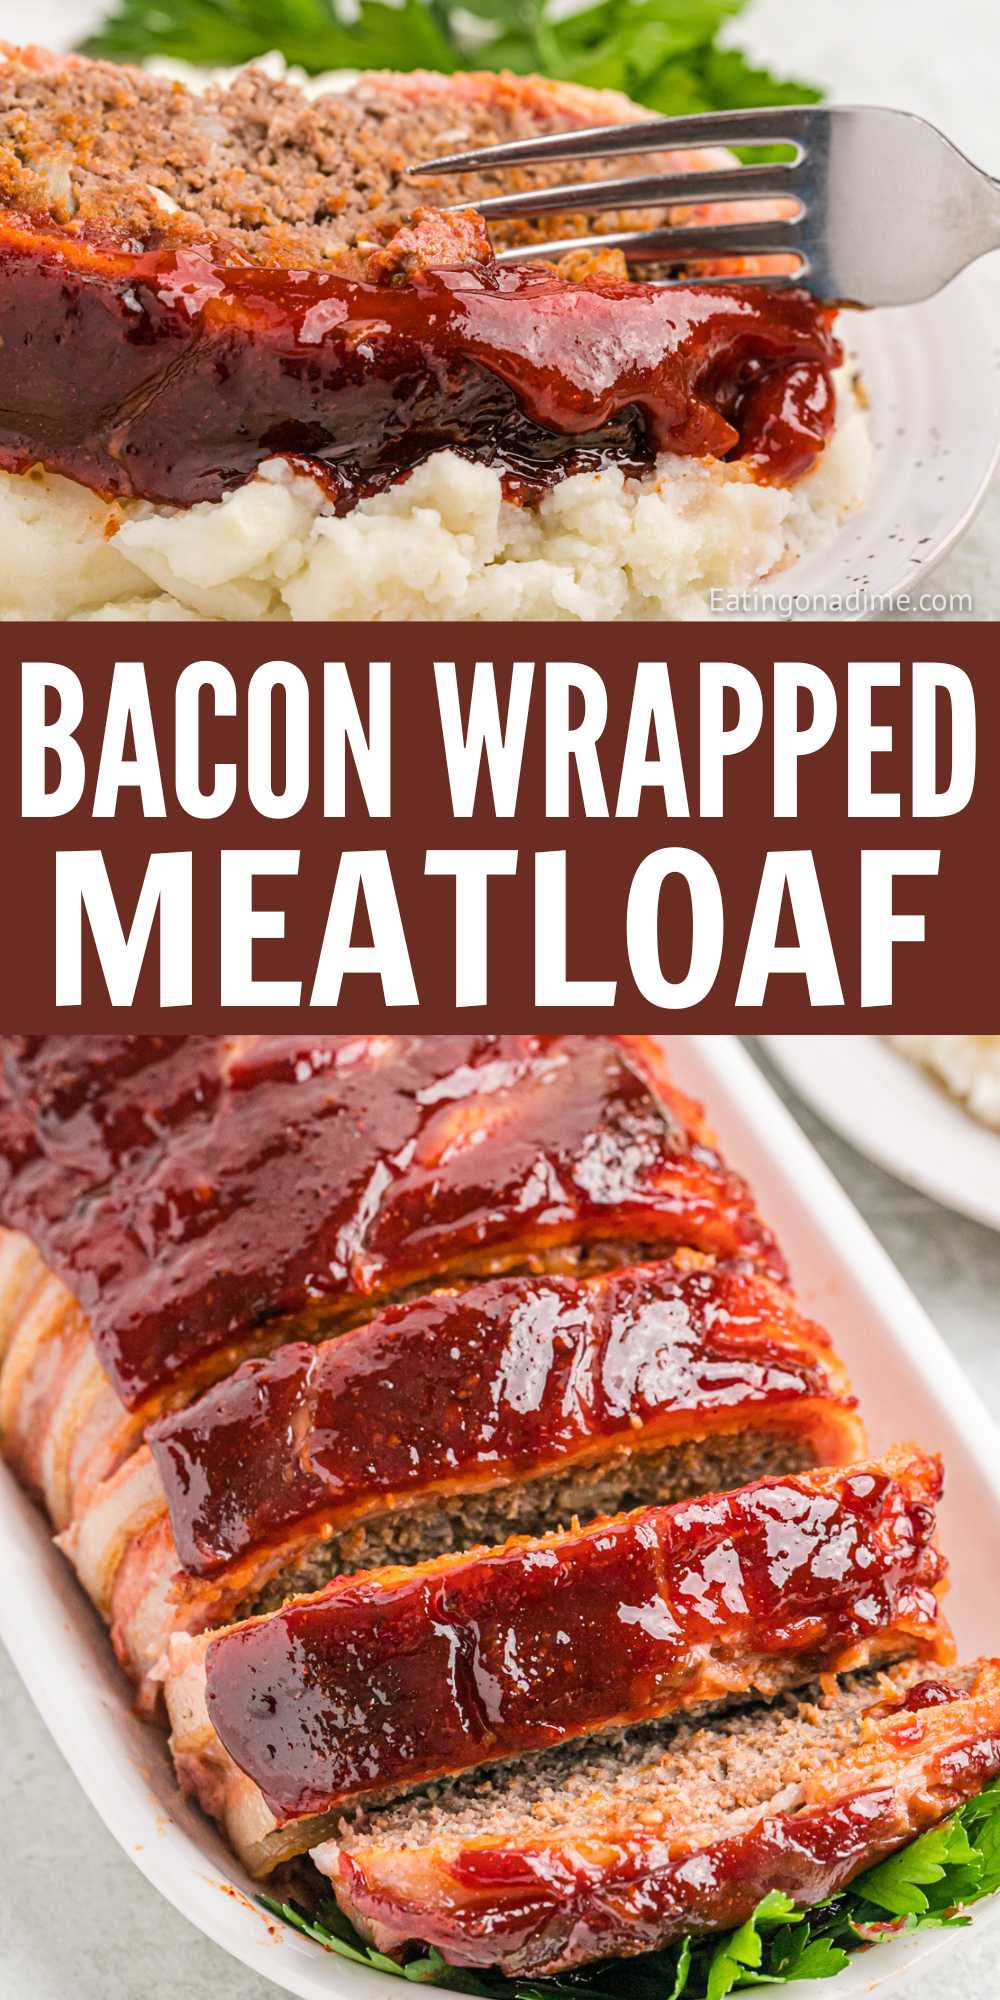 Bacon Wrapped Meatloaf is the perfect Sunday night meal. It is packed with flavor and easy to make. Wrapping your classic meatloaf recipe in bacon takes it to the next level. The ground beef mixed with simple seasoning makes this the perfect meal to start the week off right.  #eatingonadime #baconwrappedmeatloaf #meatloafrecipes